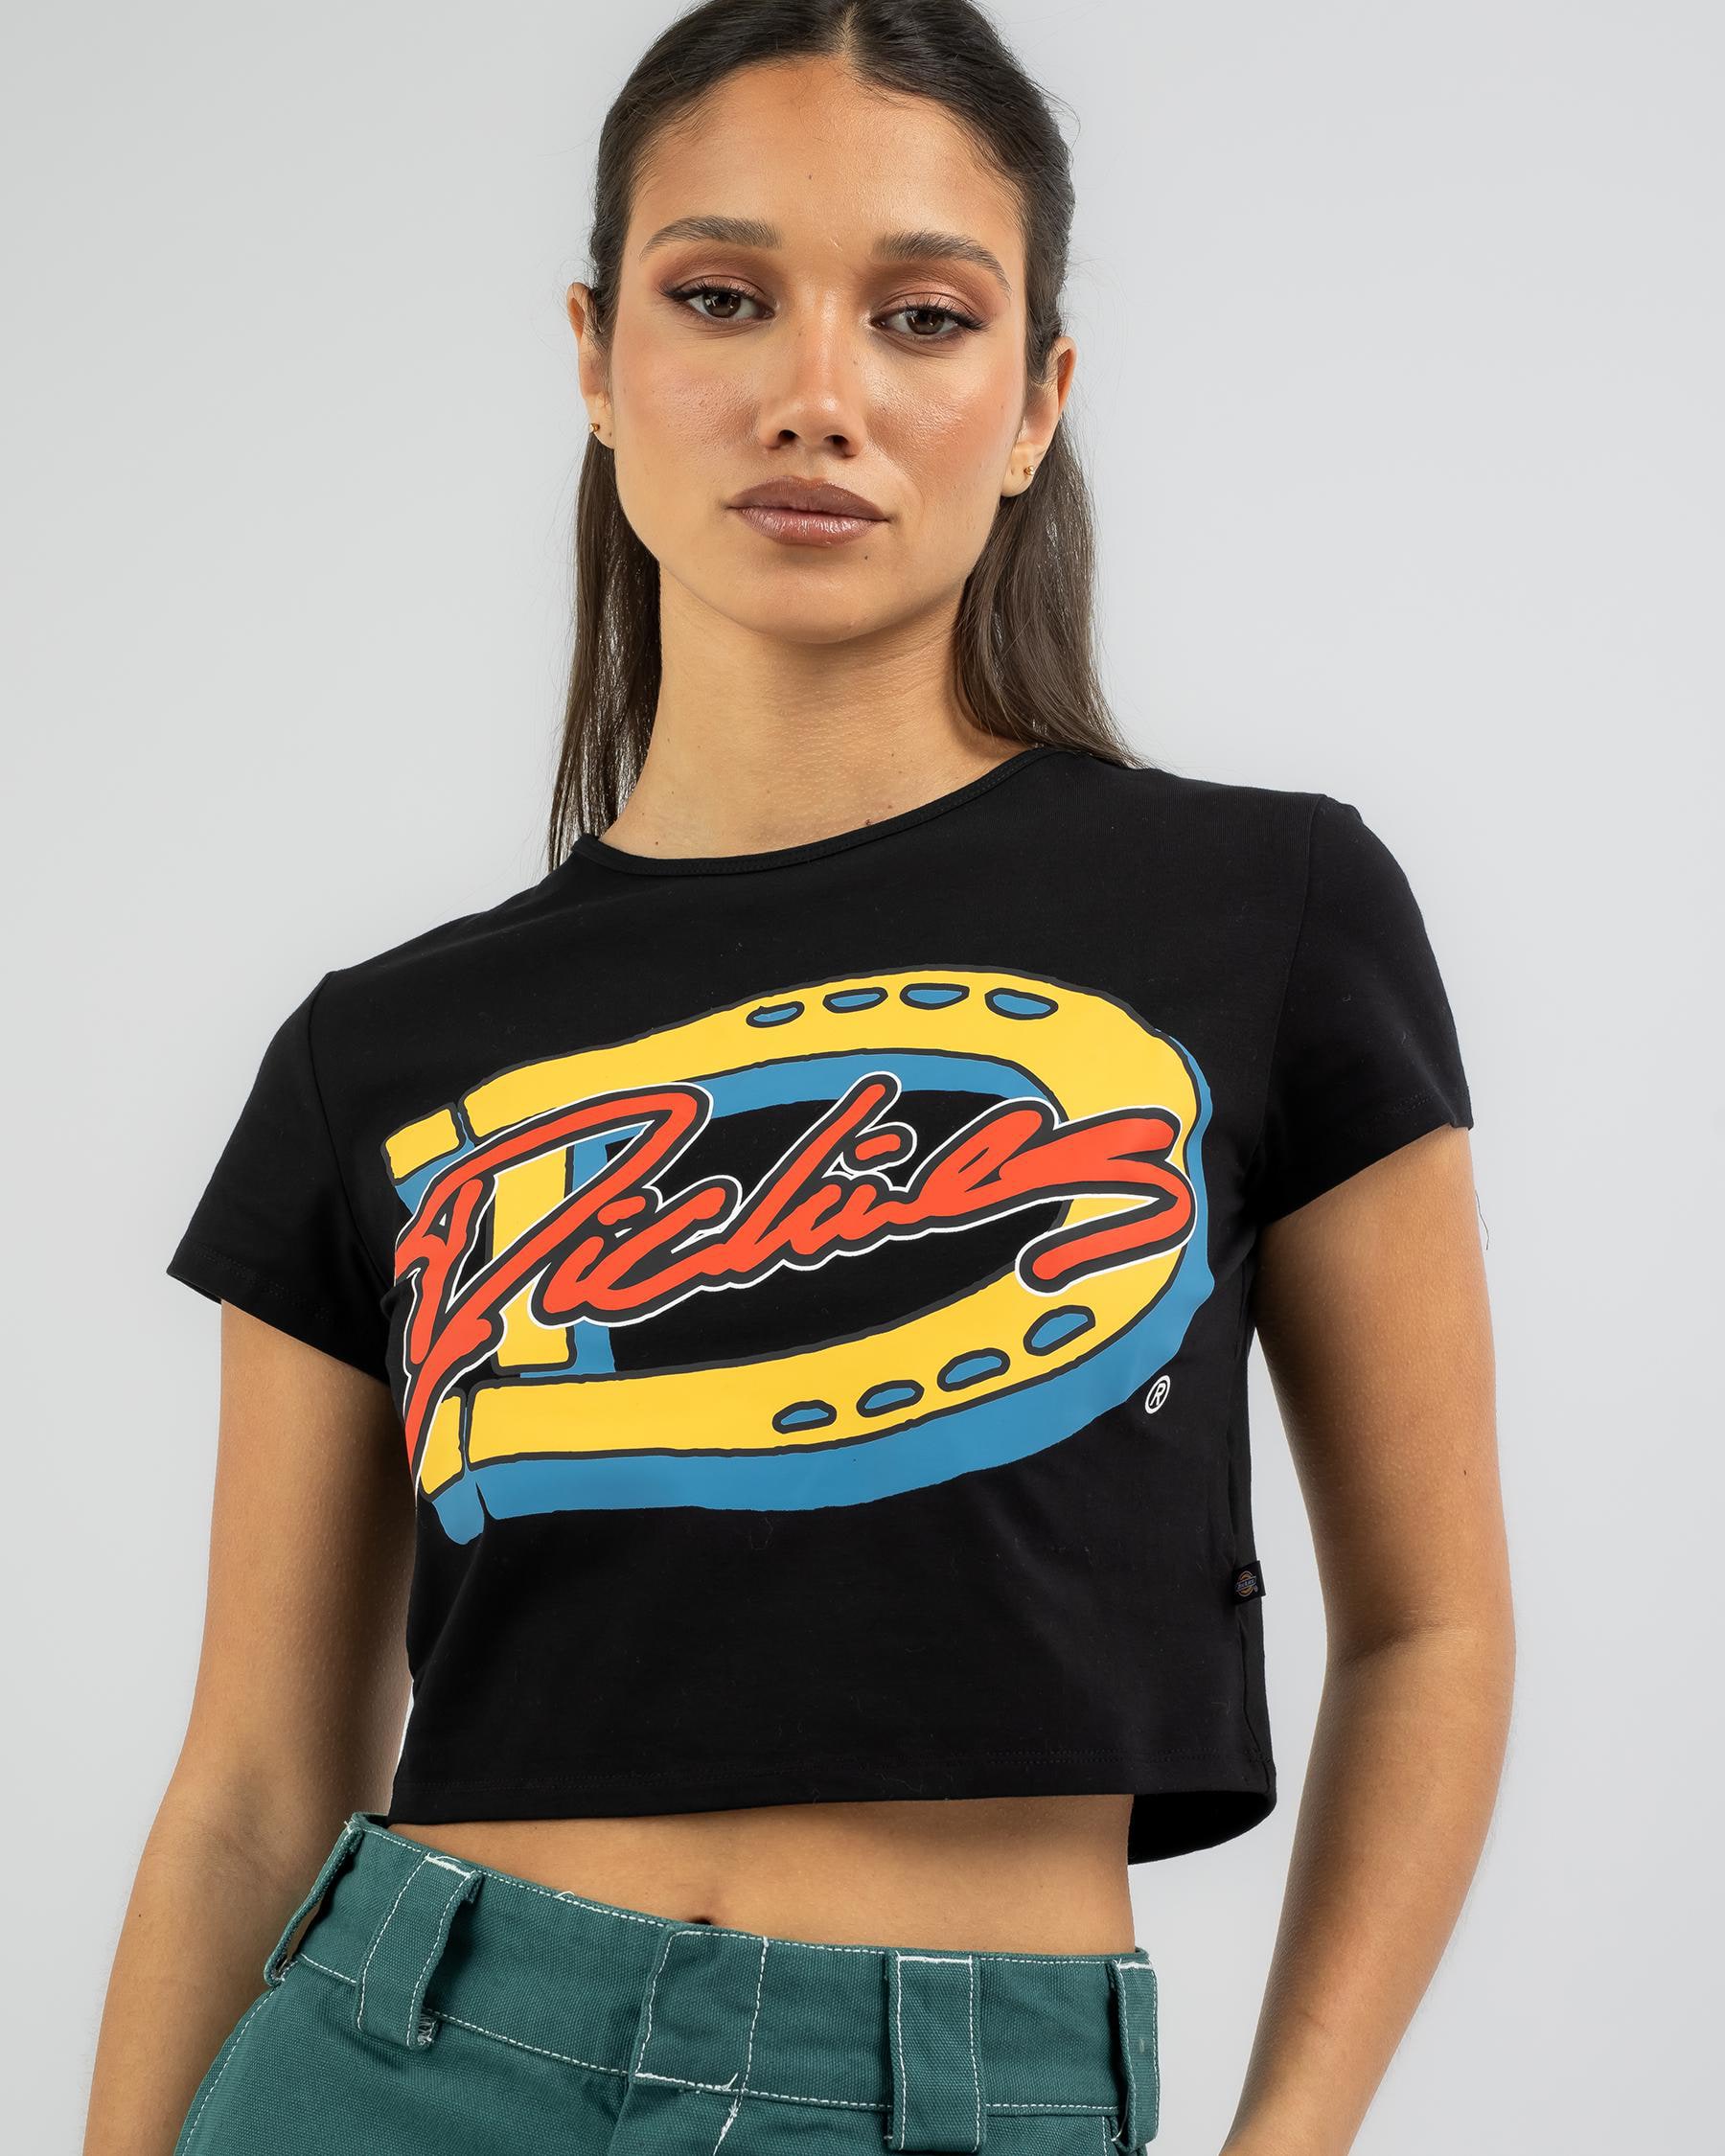 Dickies Killer Boots Baby Tee In Washed Black - Fast Shipping & Easy ...